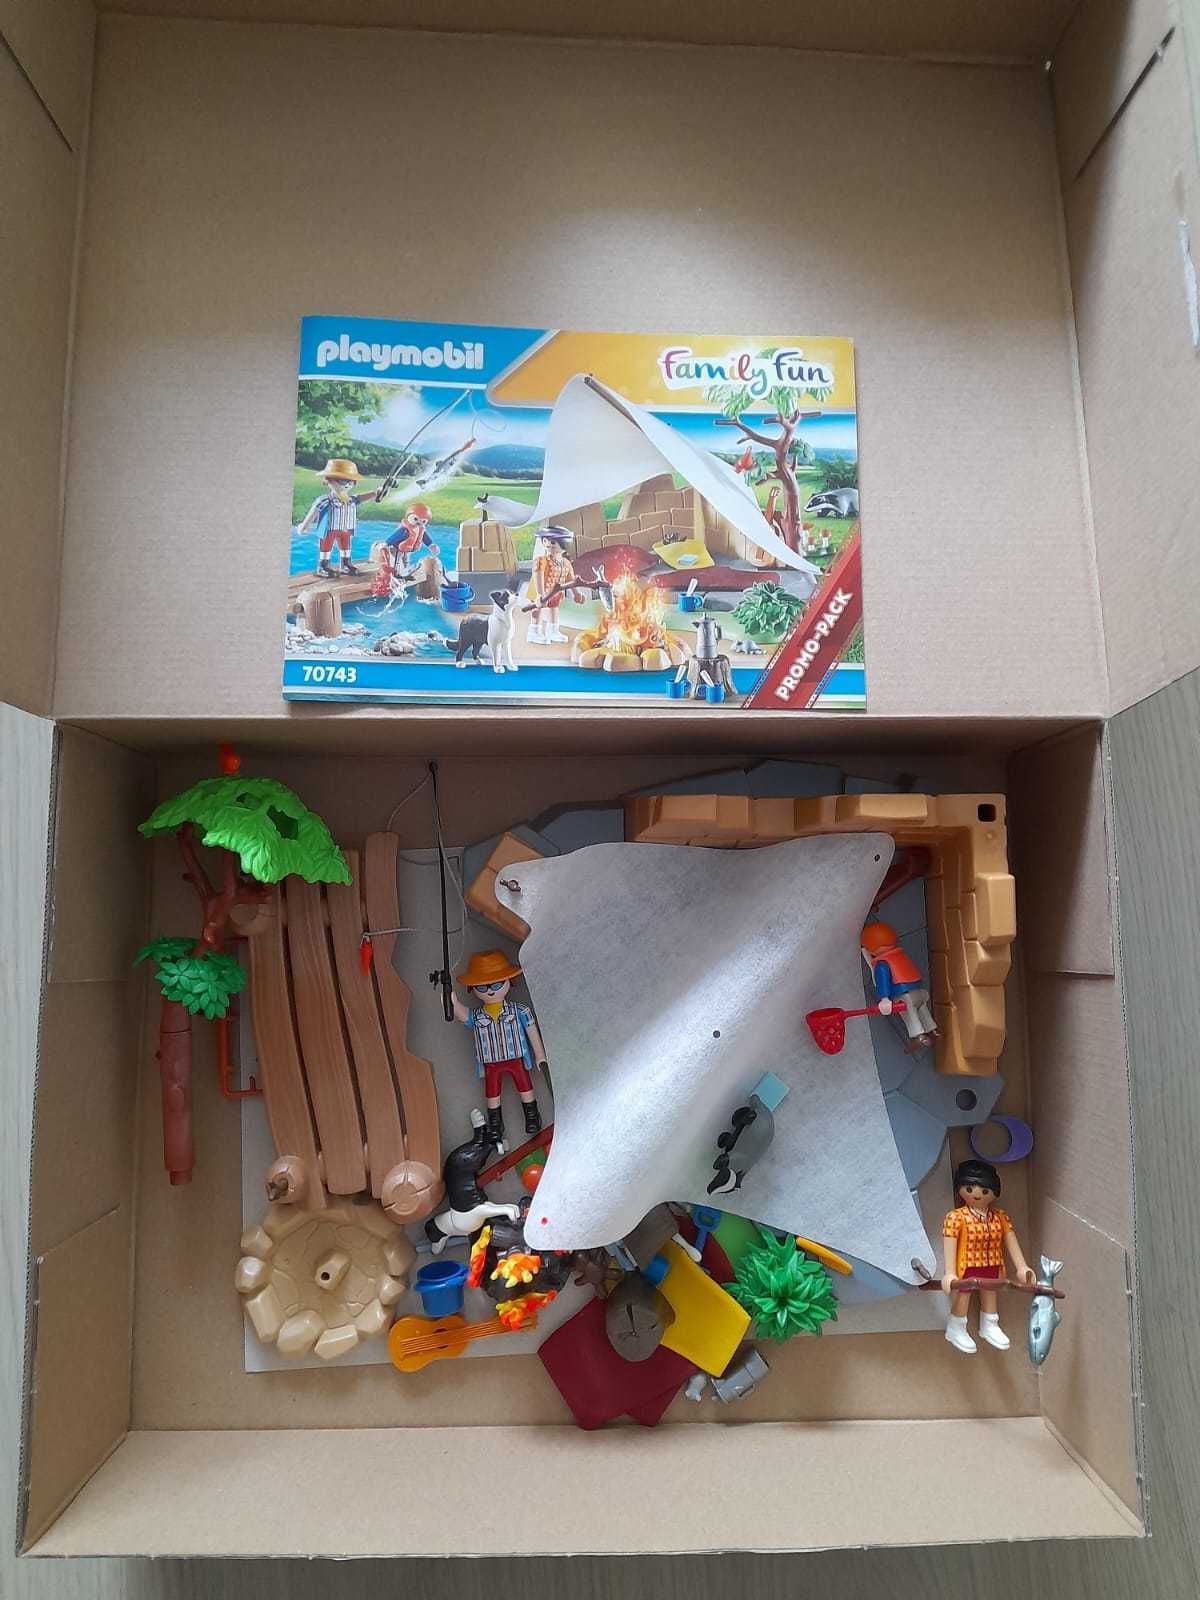 Playmobil 70743 CAMPING IN FAMILIE